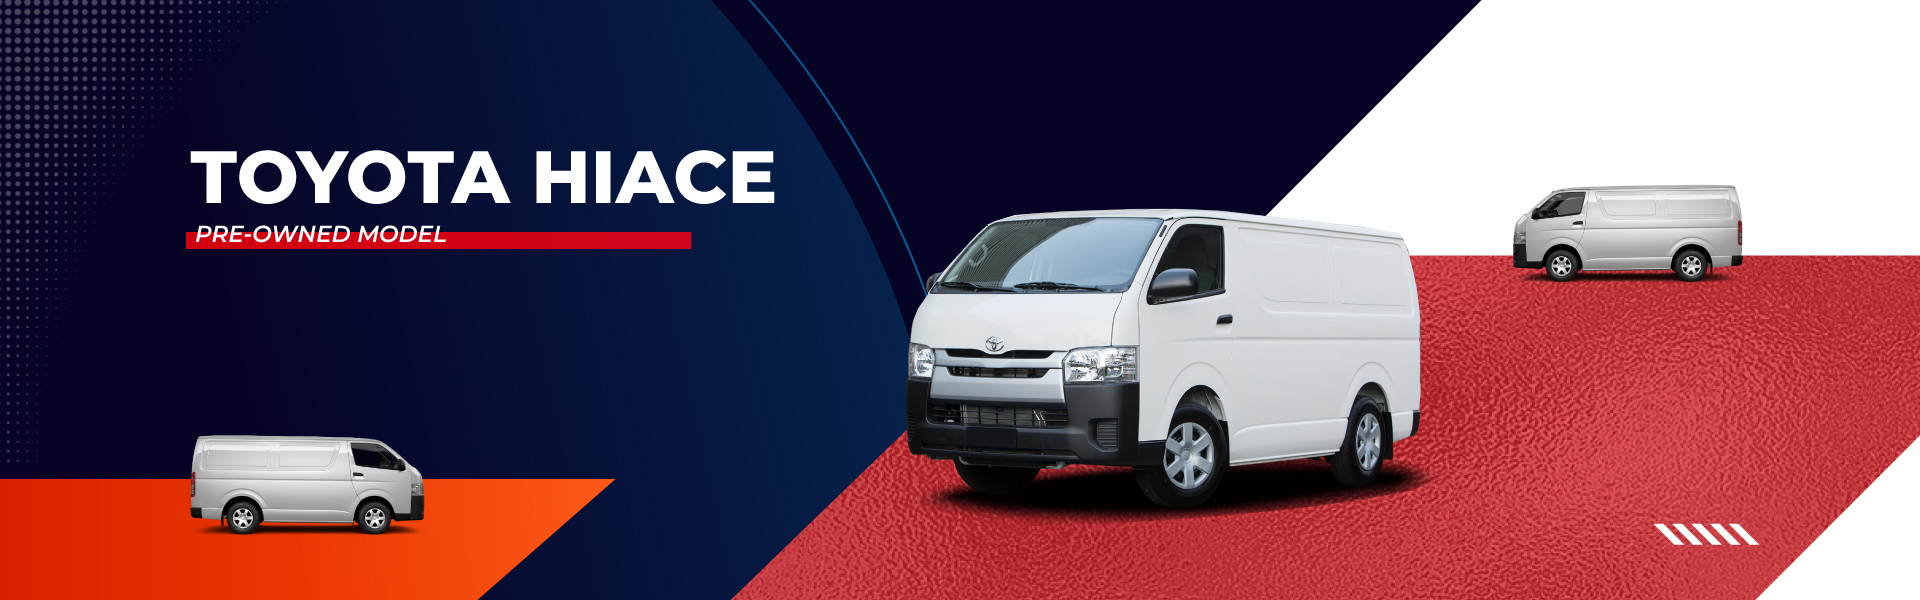 Pre-owned_Toyota Hiace